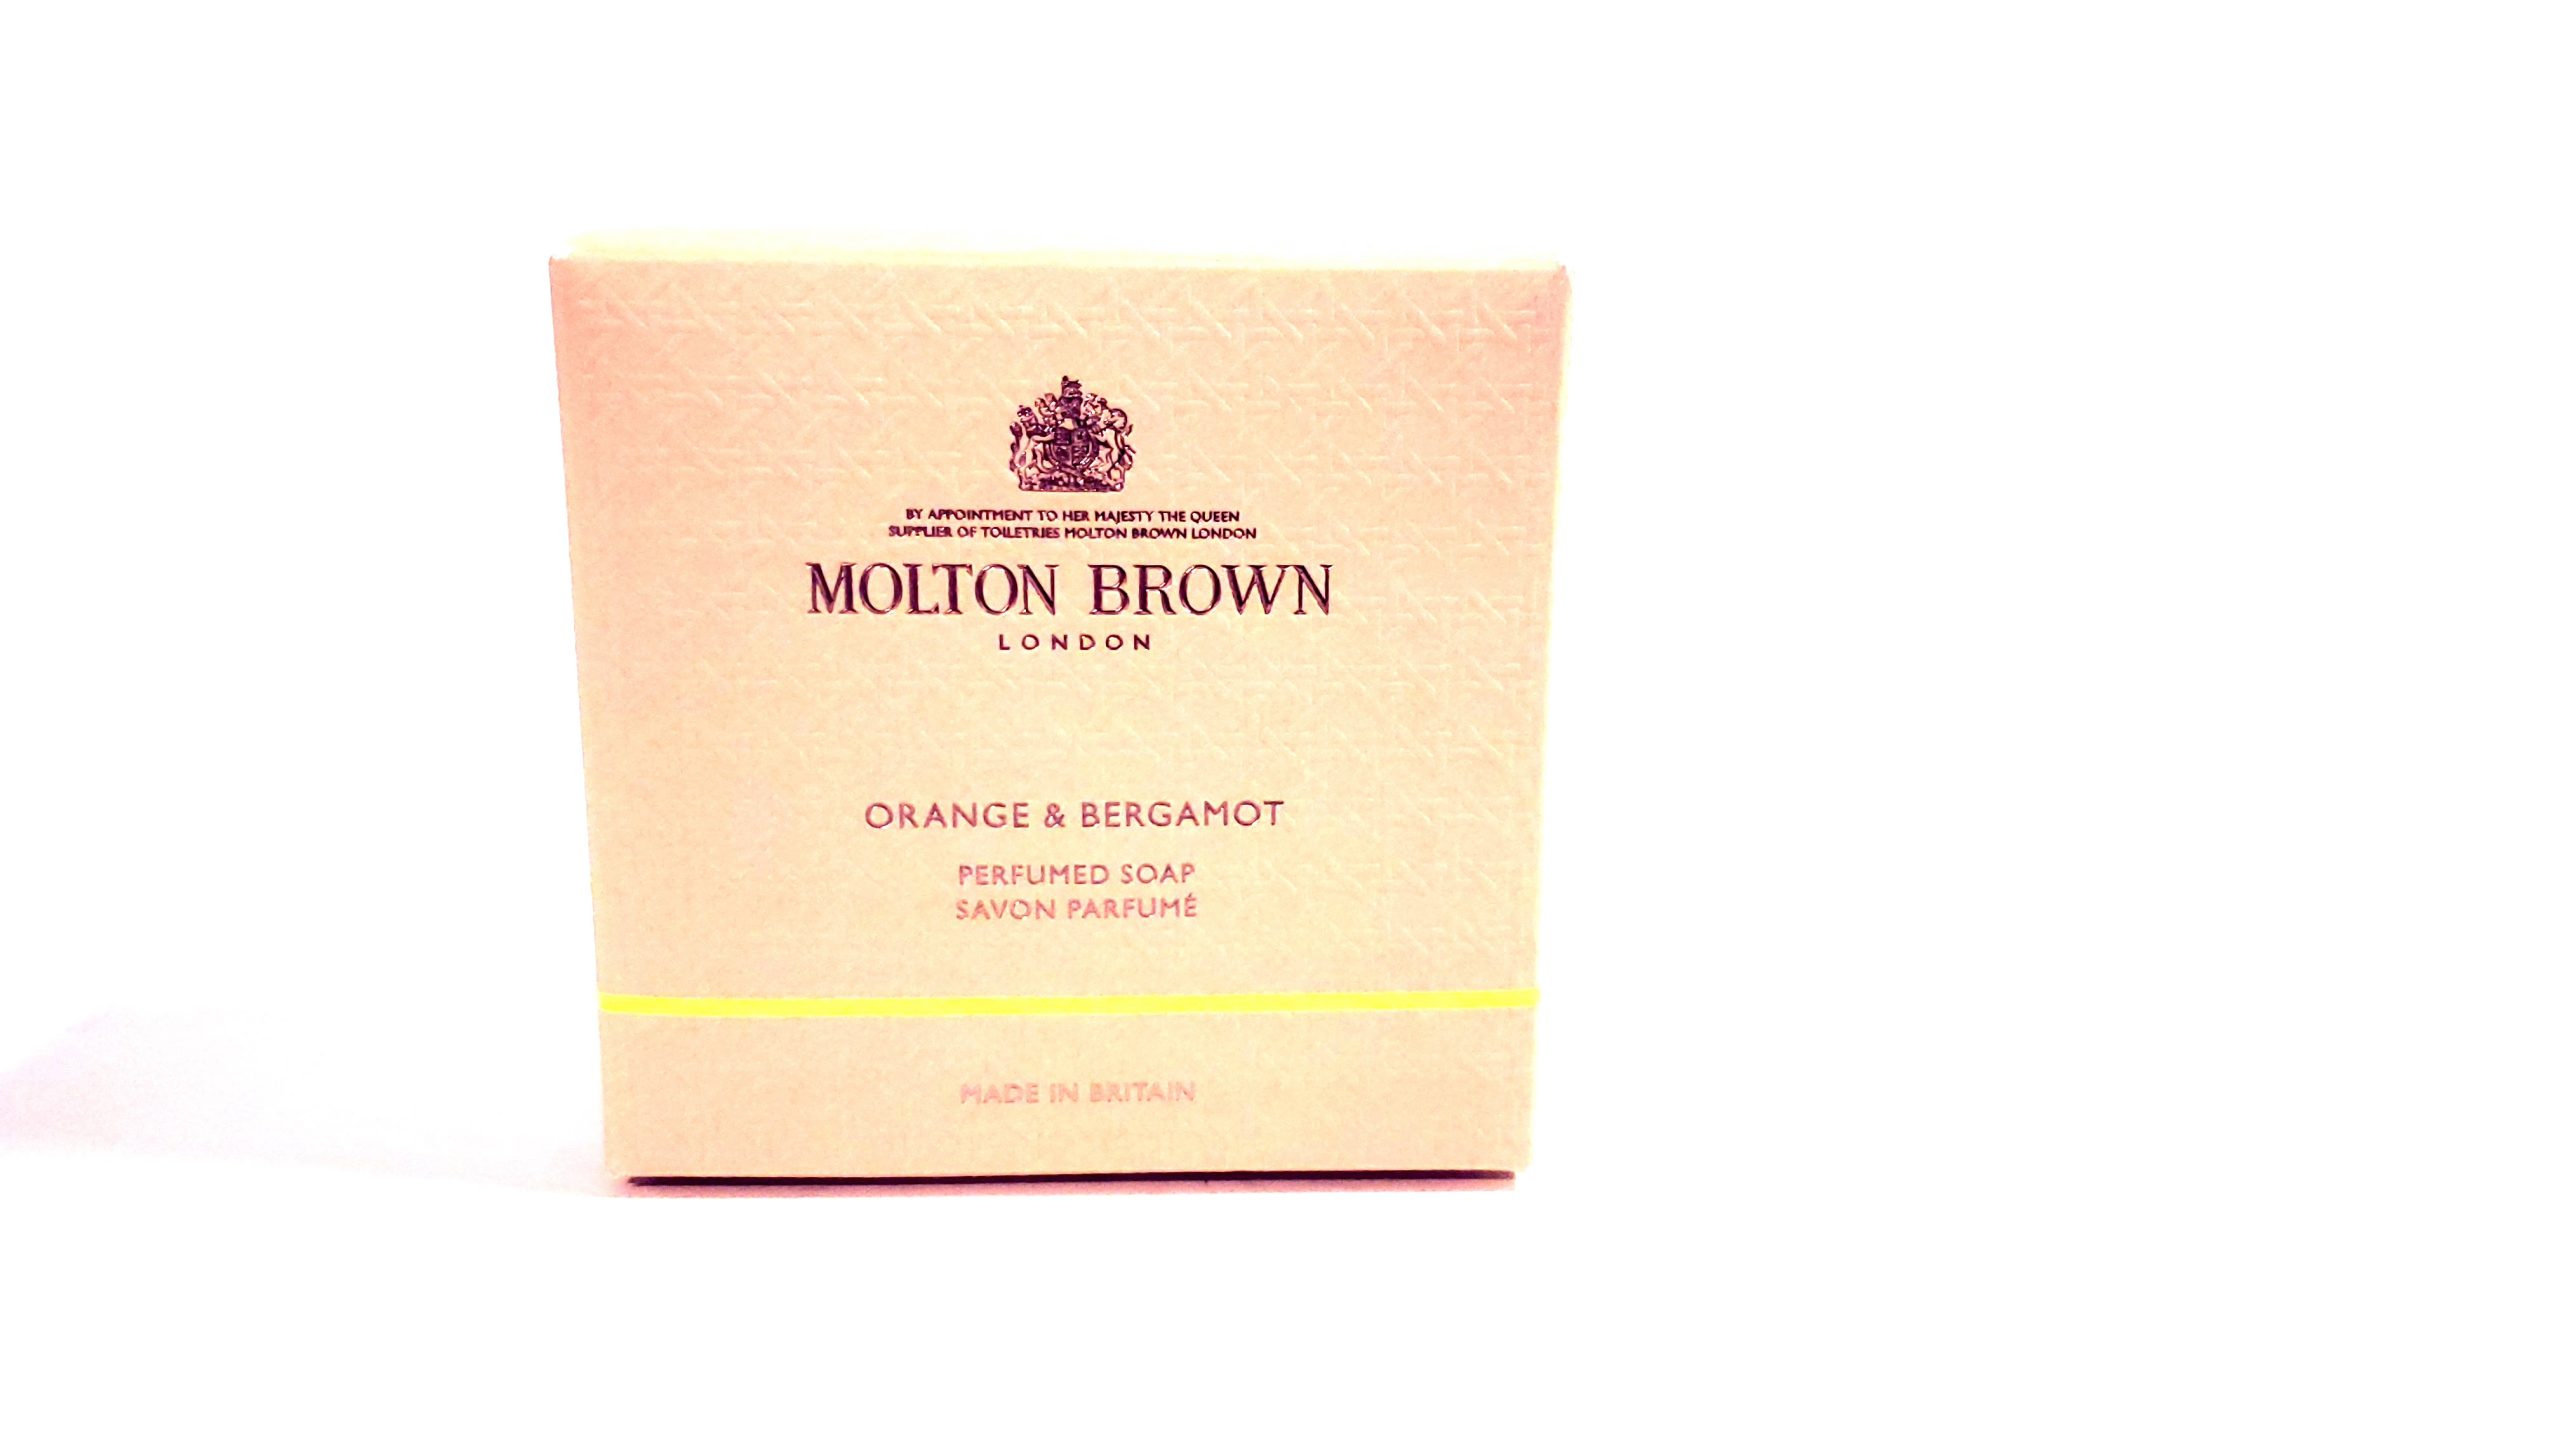 A box of Molton Brown Orange & Bergamot Perfumed Bar of Soap, 150g on a white background.